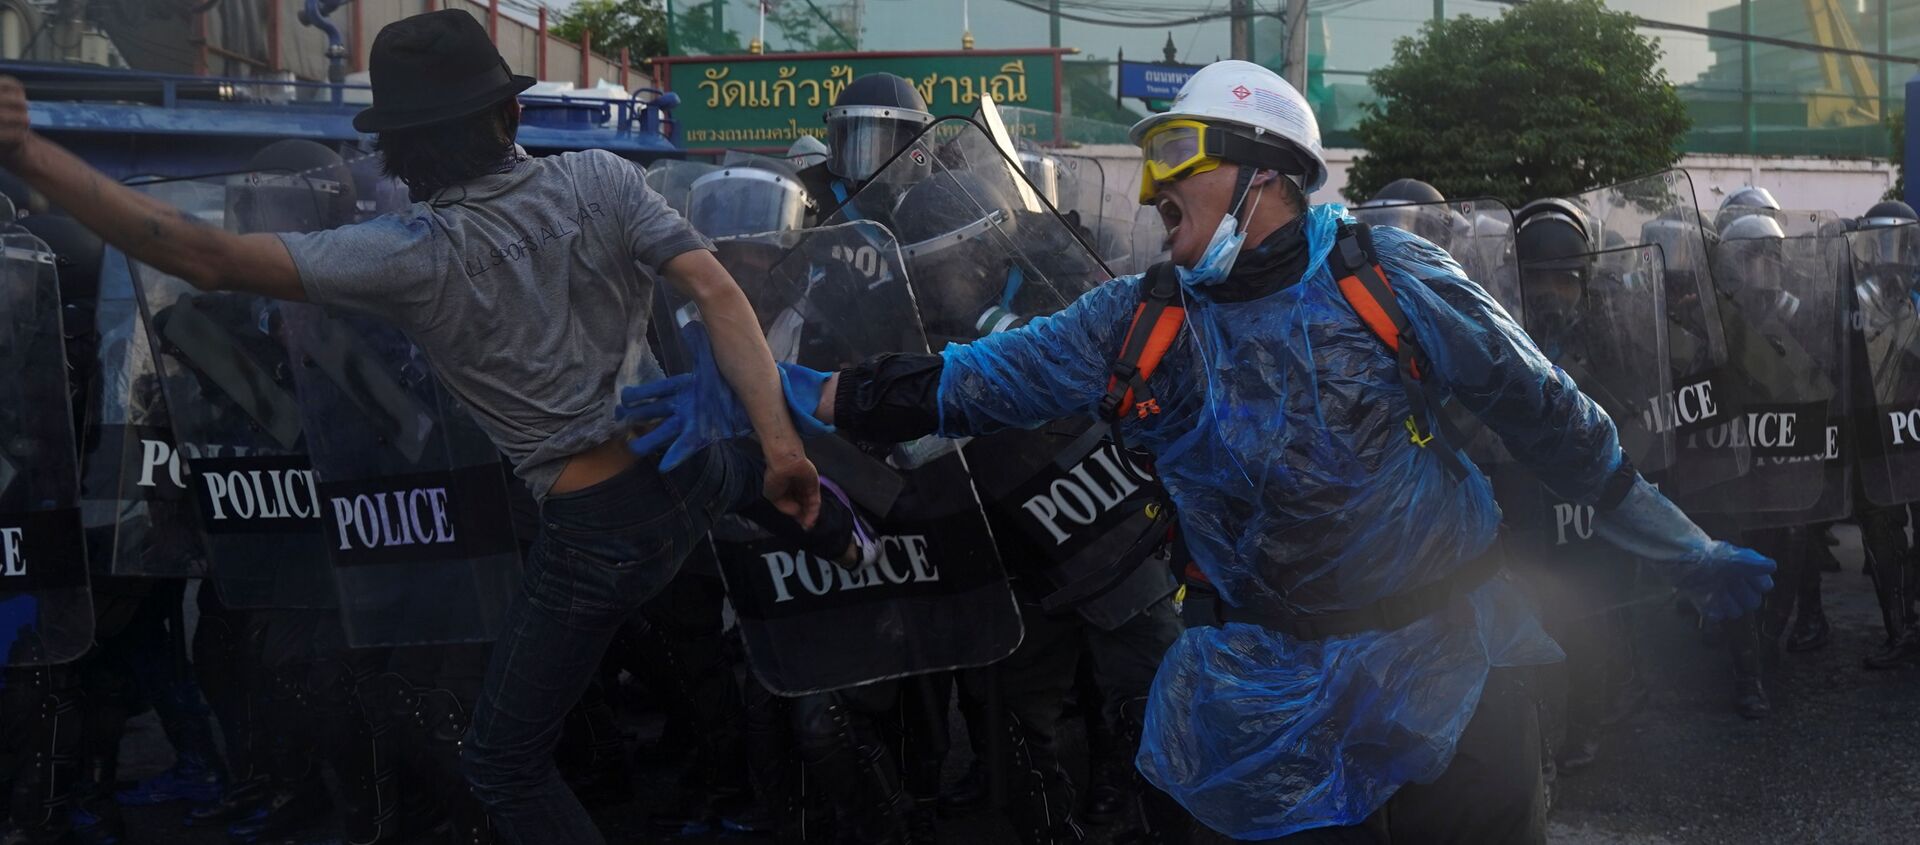 Demonstrators clash with riot police during an anti-government protest as lawmakers debate  constitution change, outside the parliament in Bangkok, Thailand, 17 November 2020. - Sputnik International, 1920, 19.11.2020